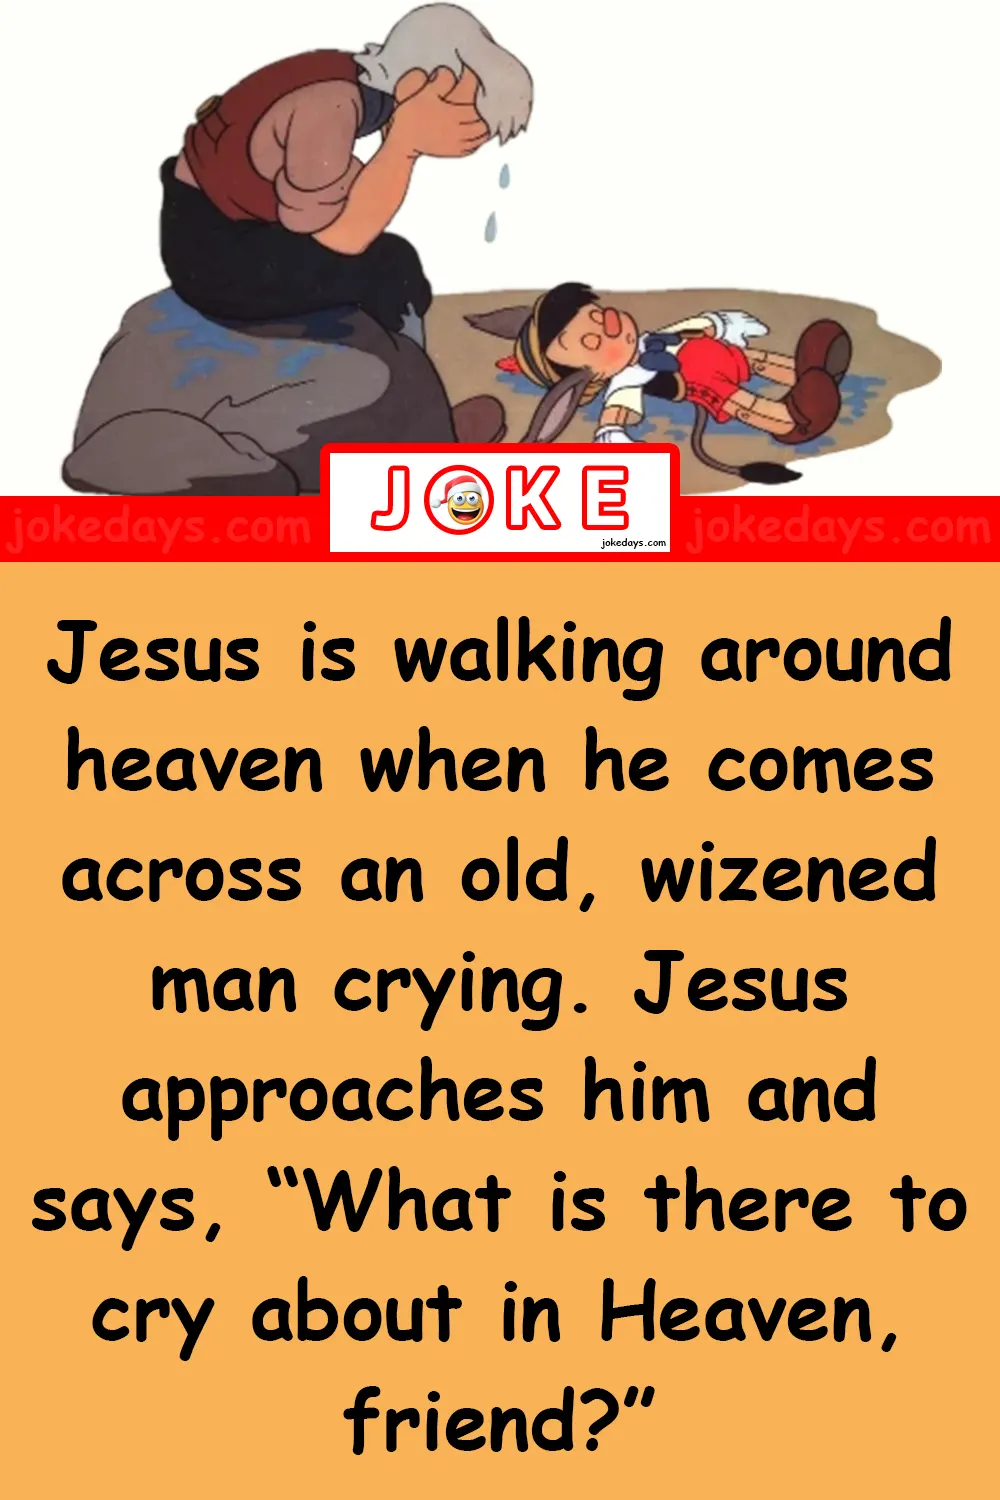 What is there to cry about in Heaven